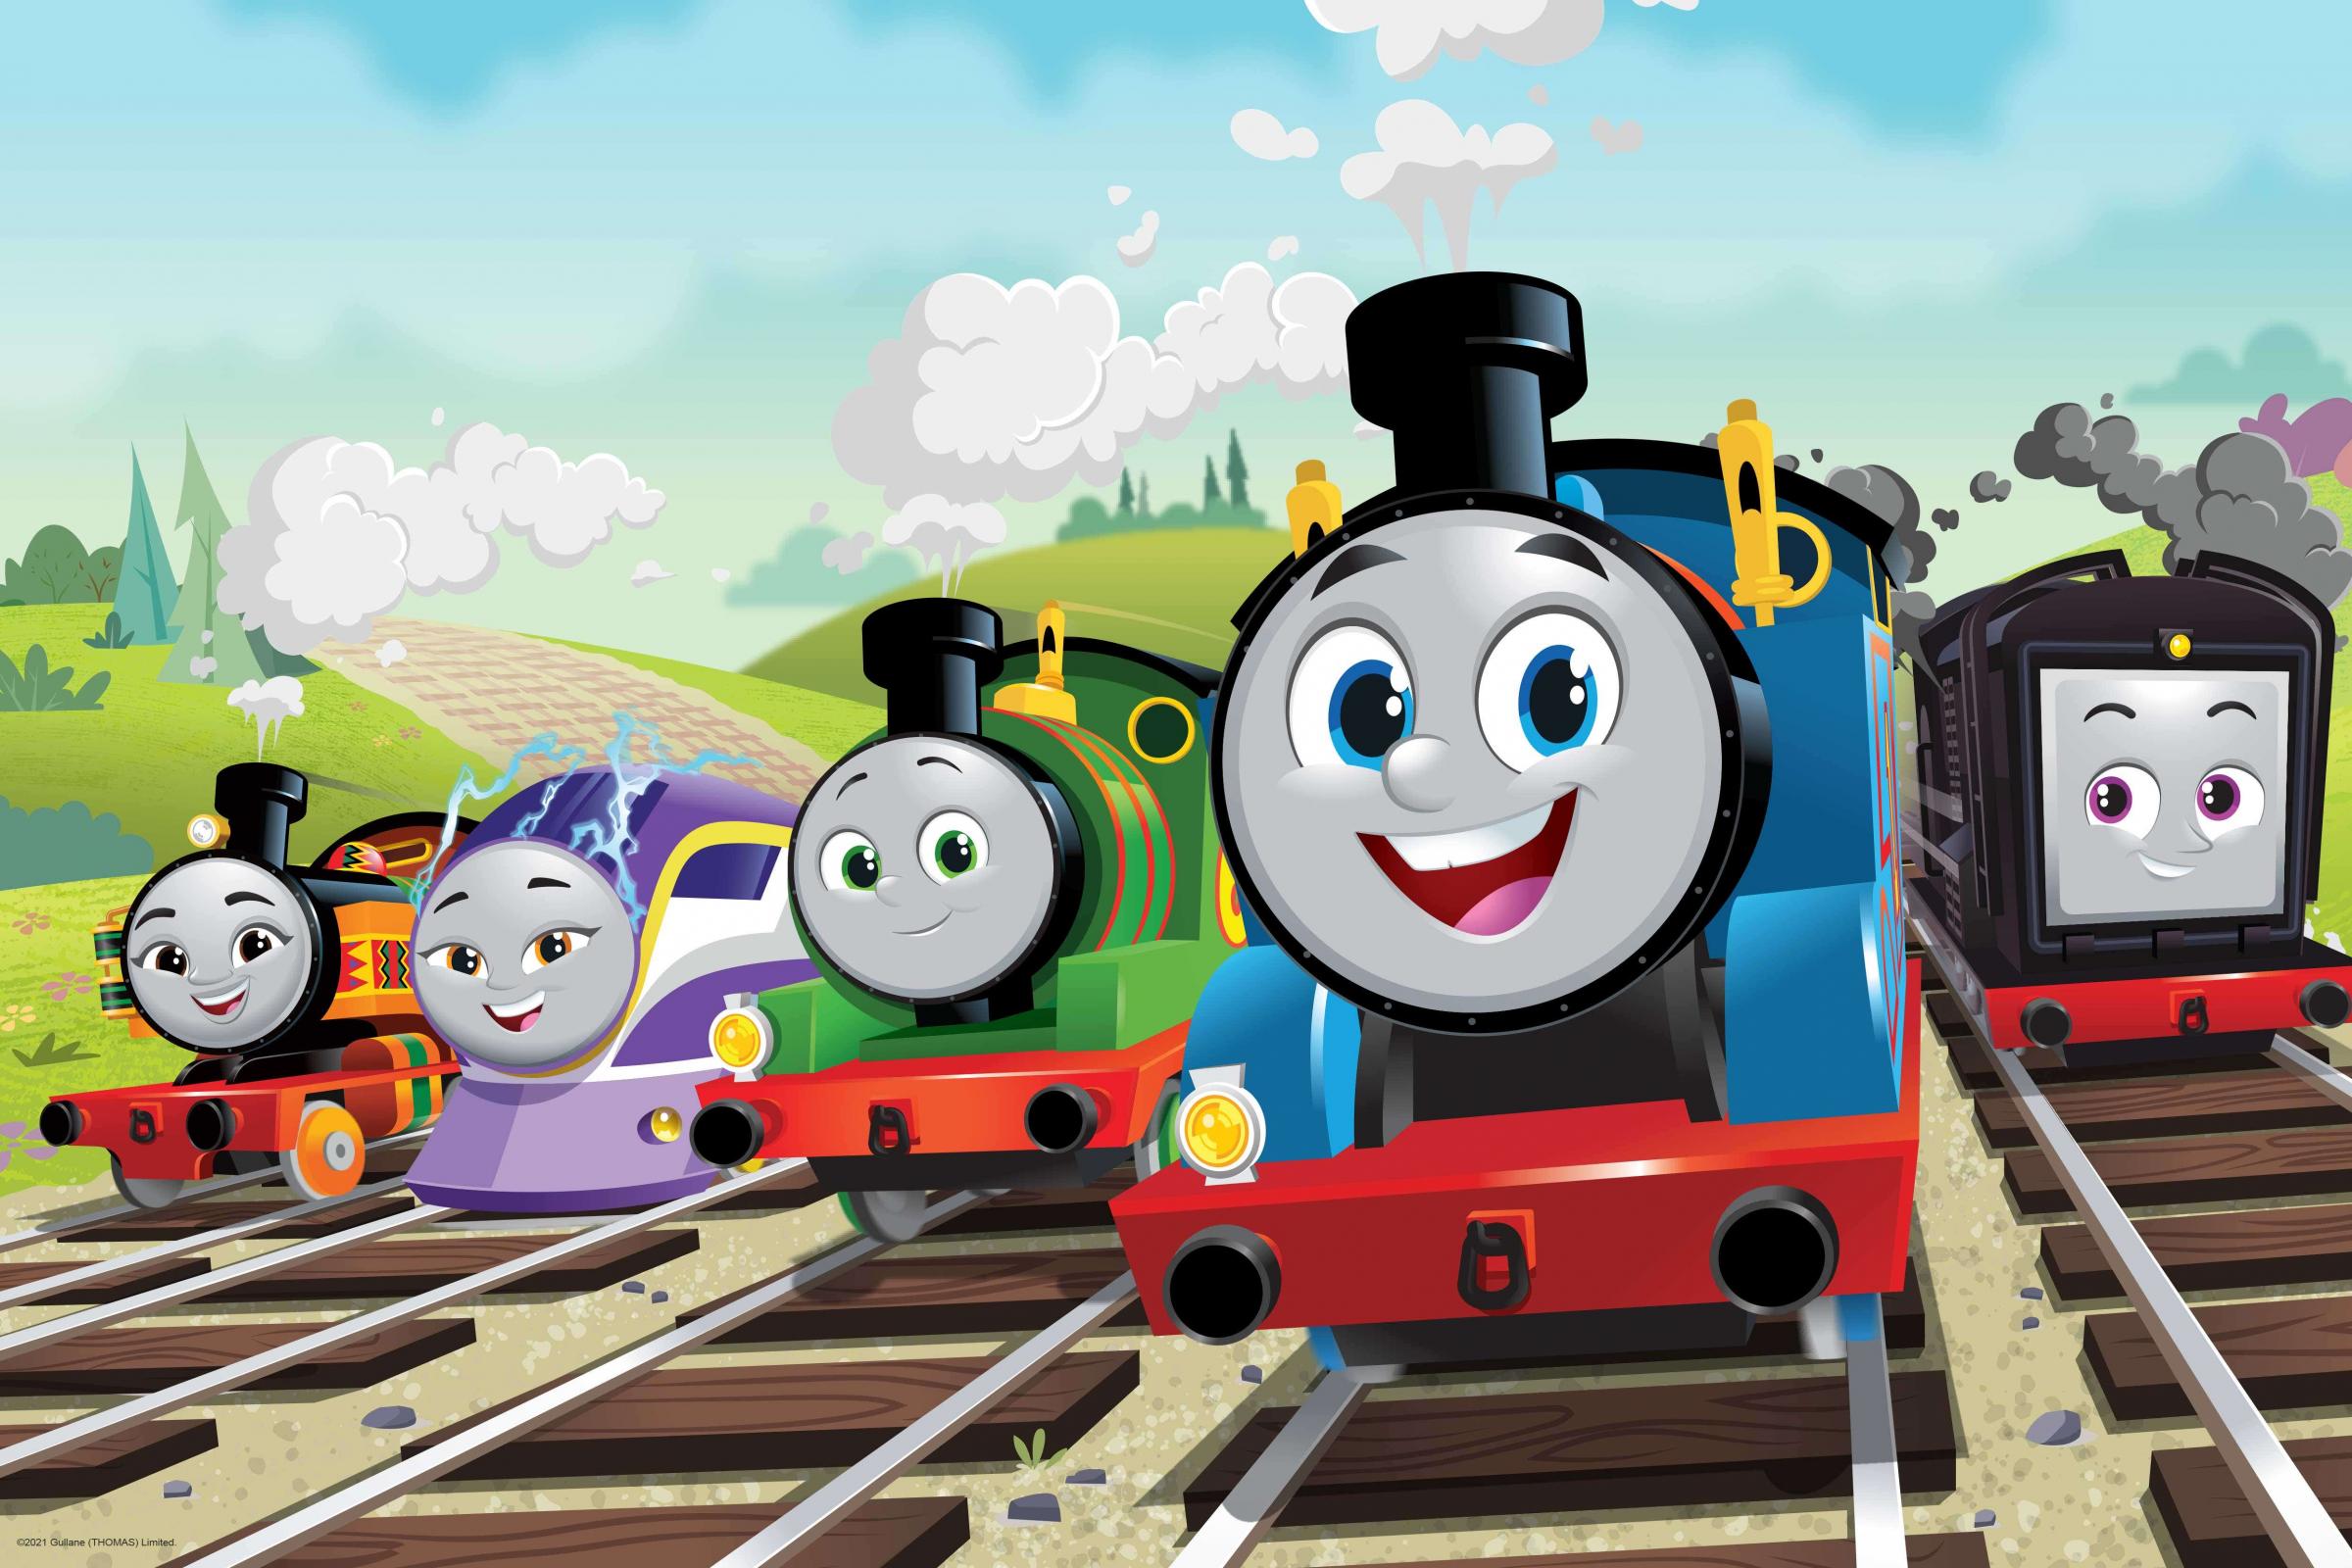 Thomas And Friends debuts new creative direction in major revamp